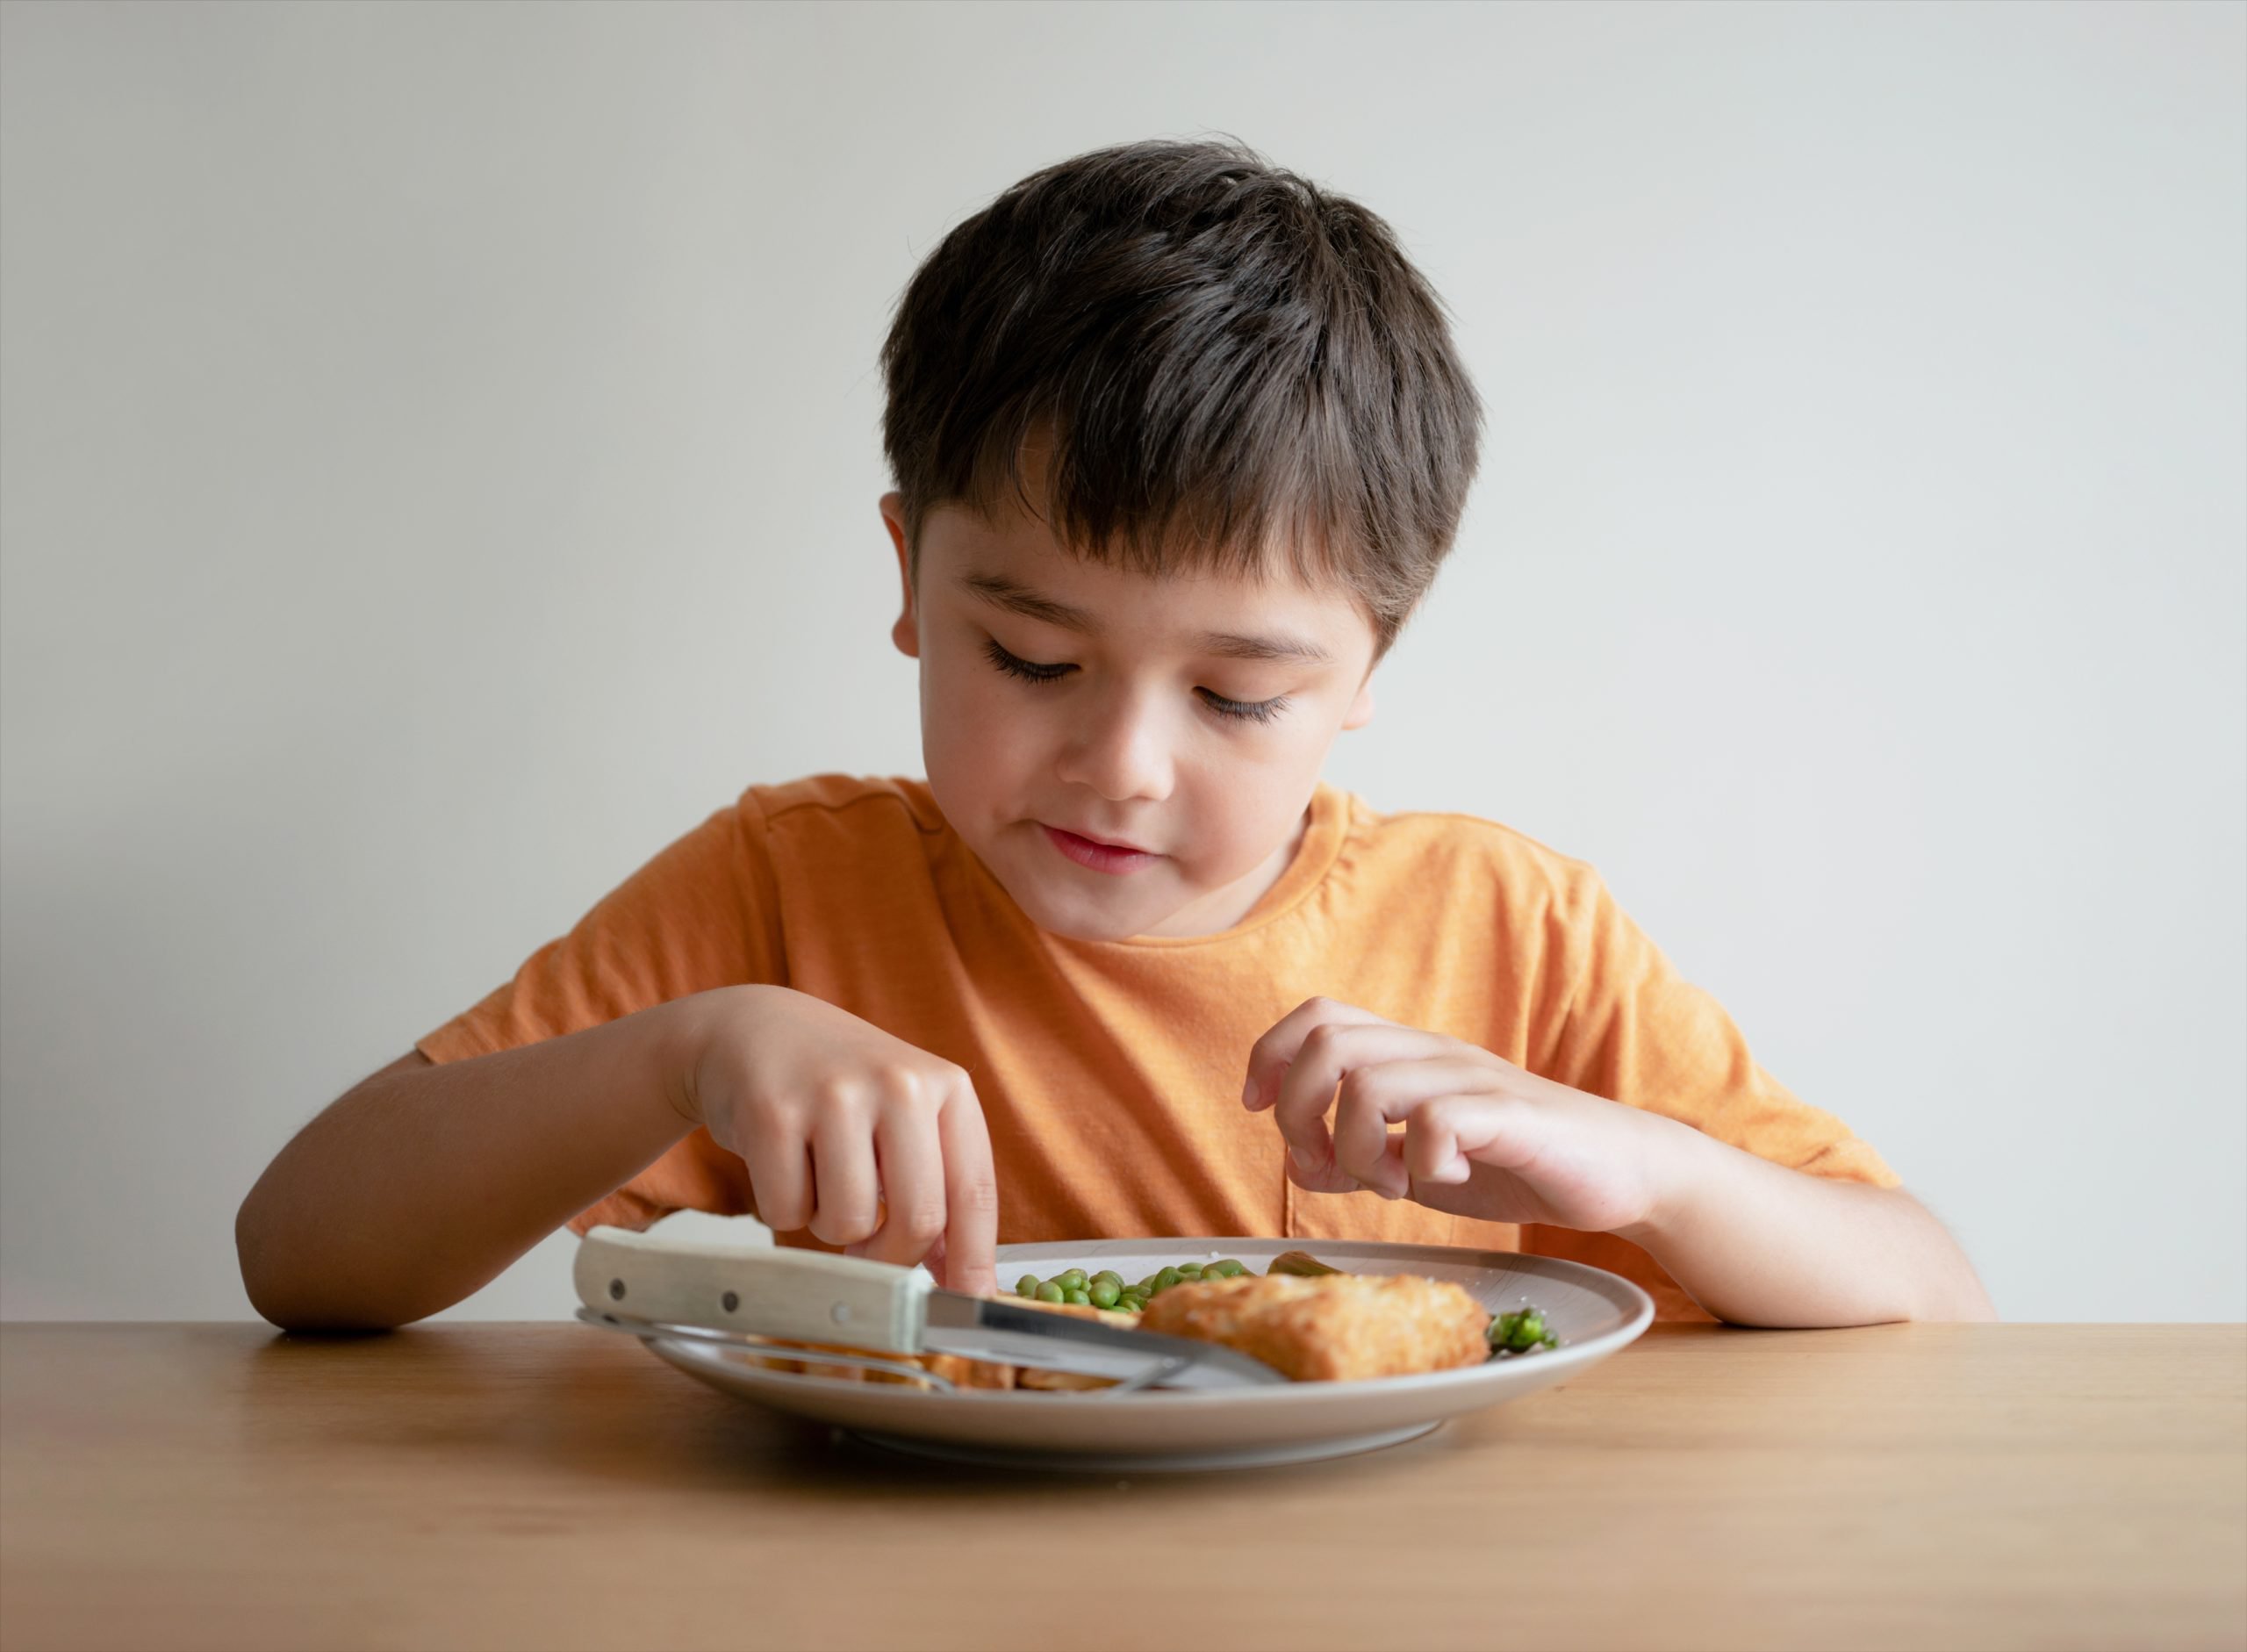 A young boy eating homemade fish fingers and chips